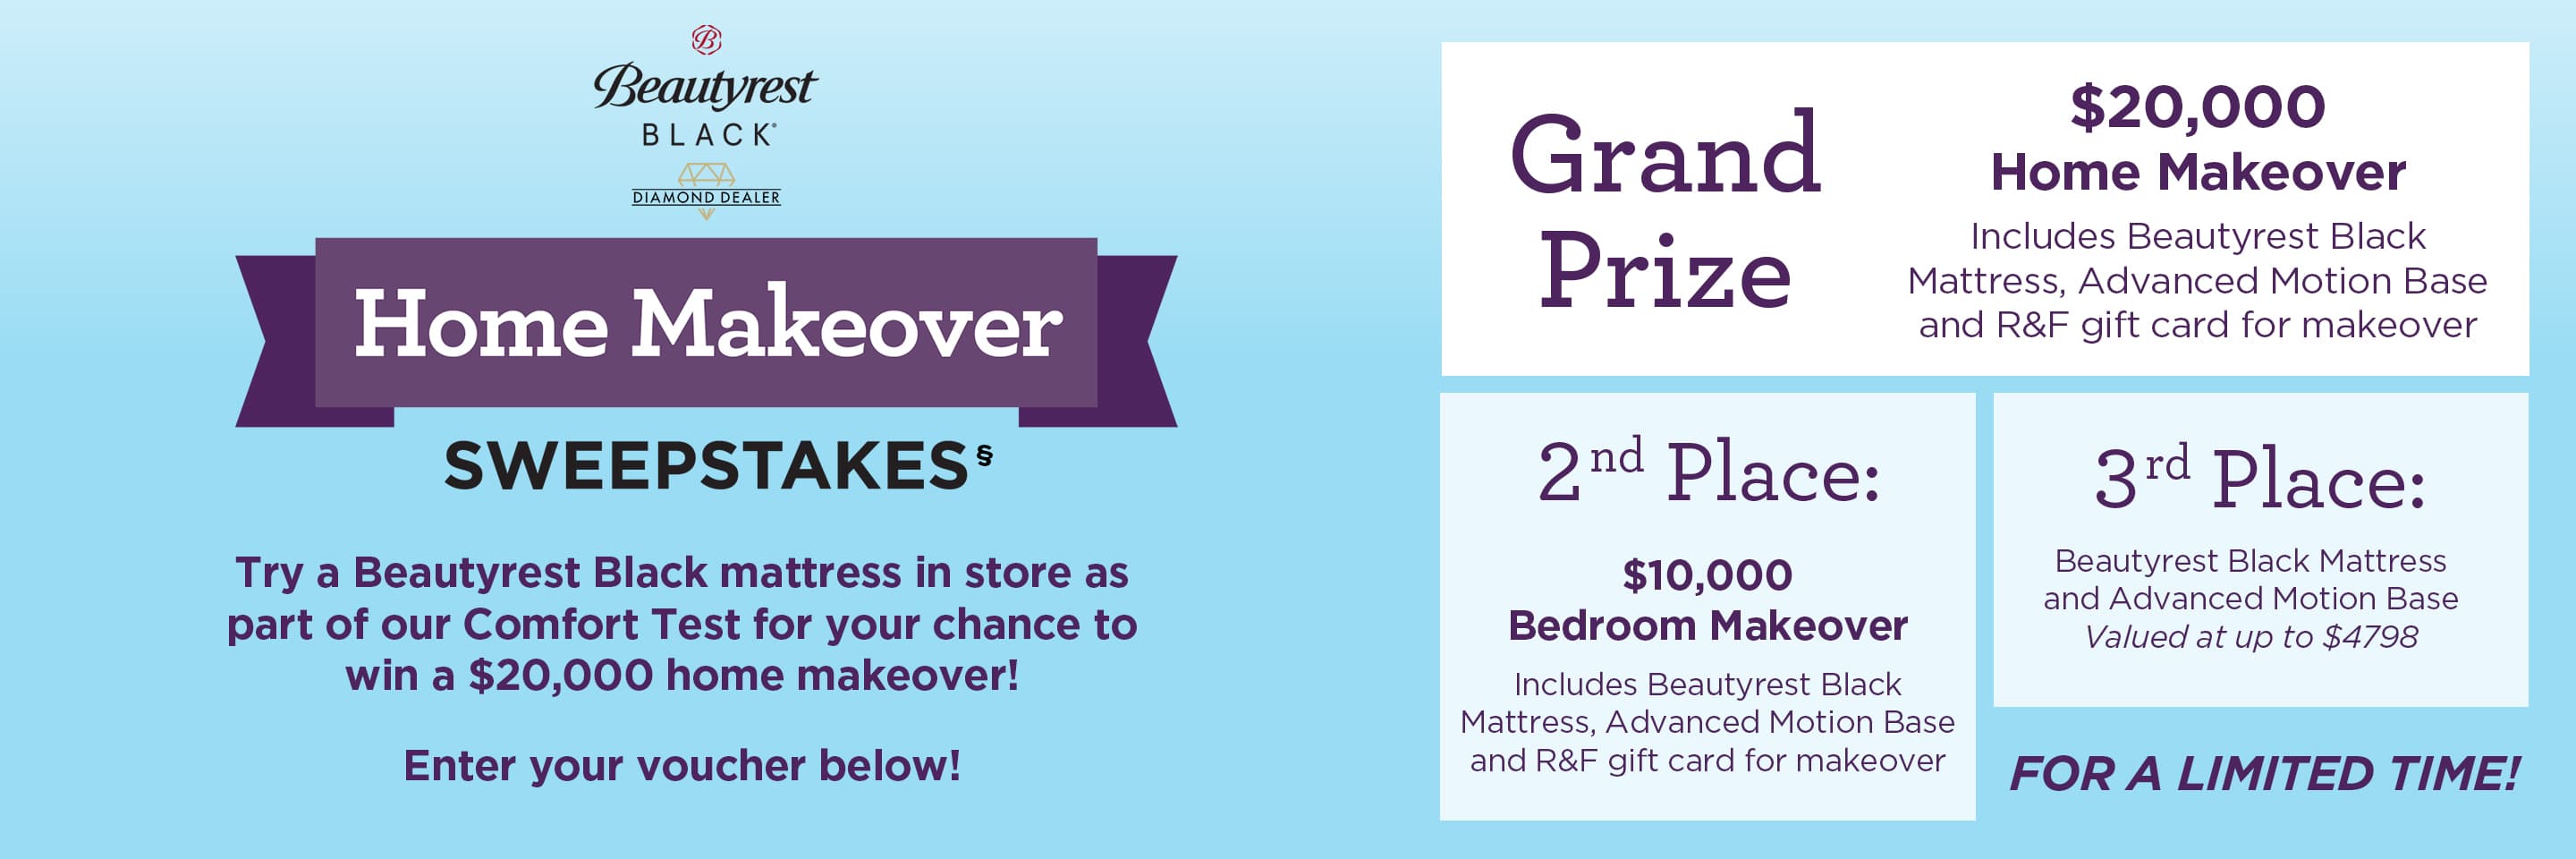 Beautyrest Black Home Makeover Sweepstakes Entry Raymour & Flanigan